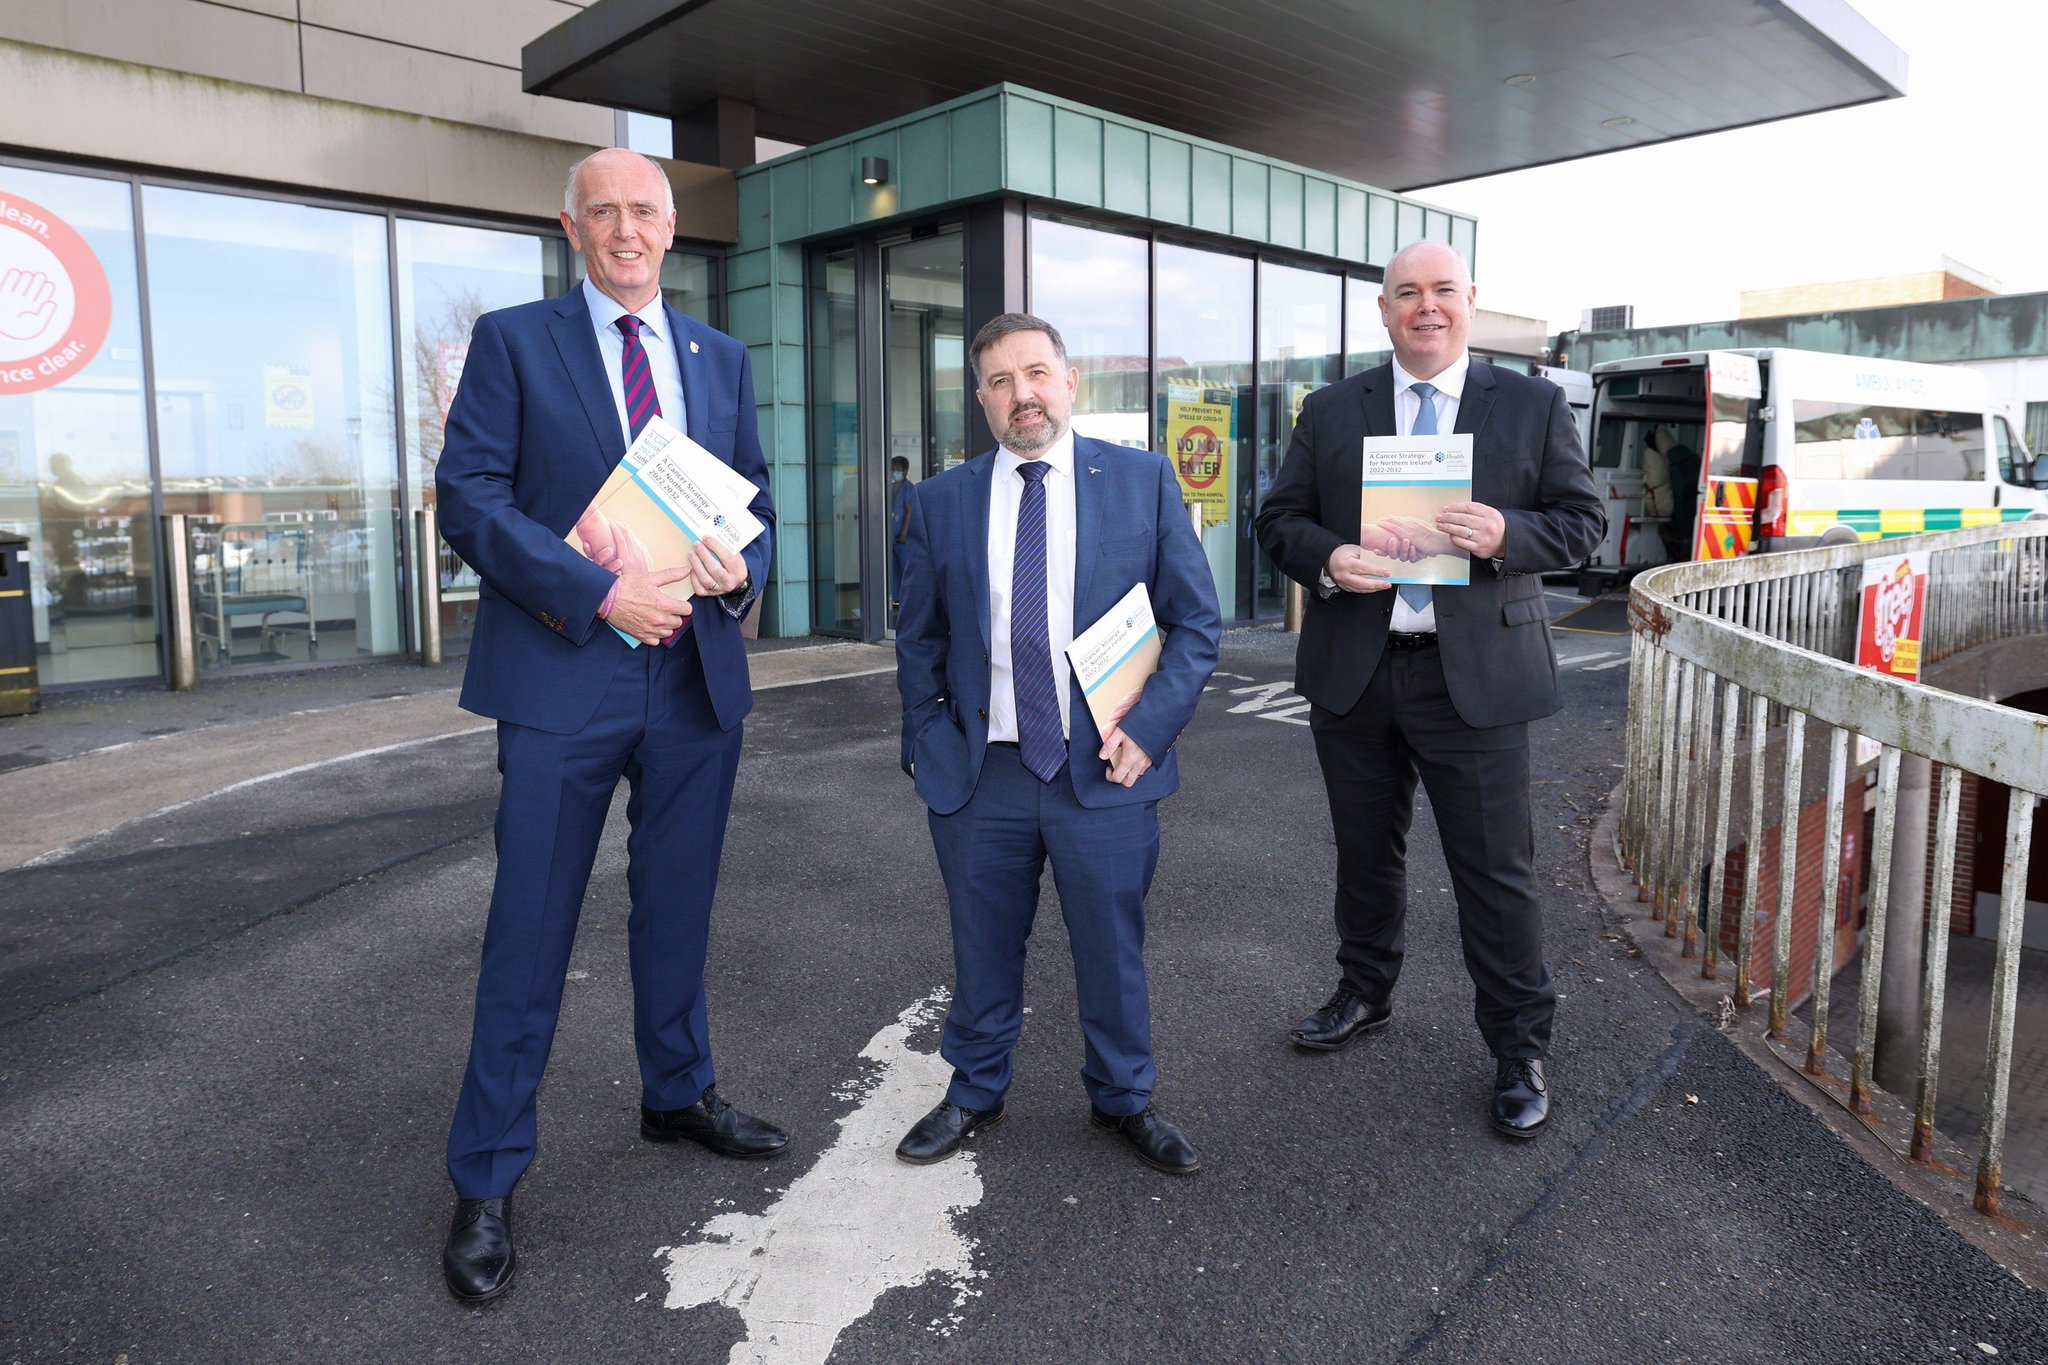 Health minister Robin Swann unveils 10-year cancer strategy for Northern Ireland